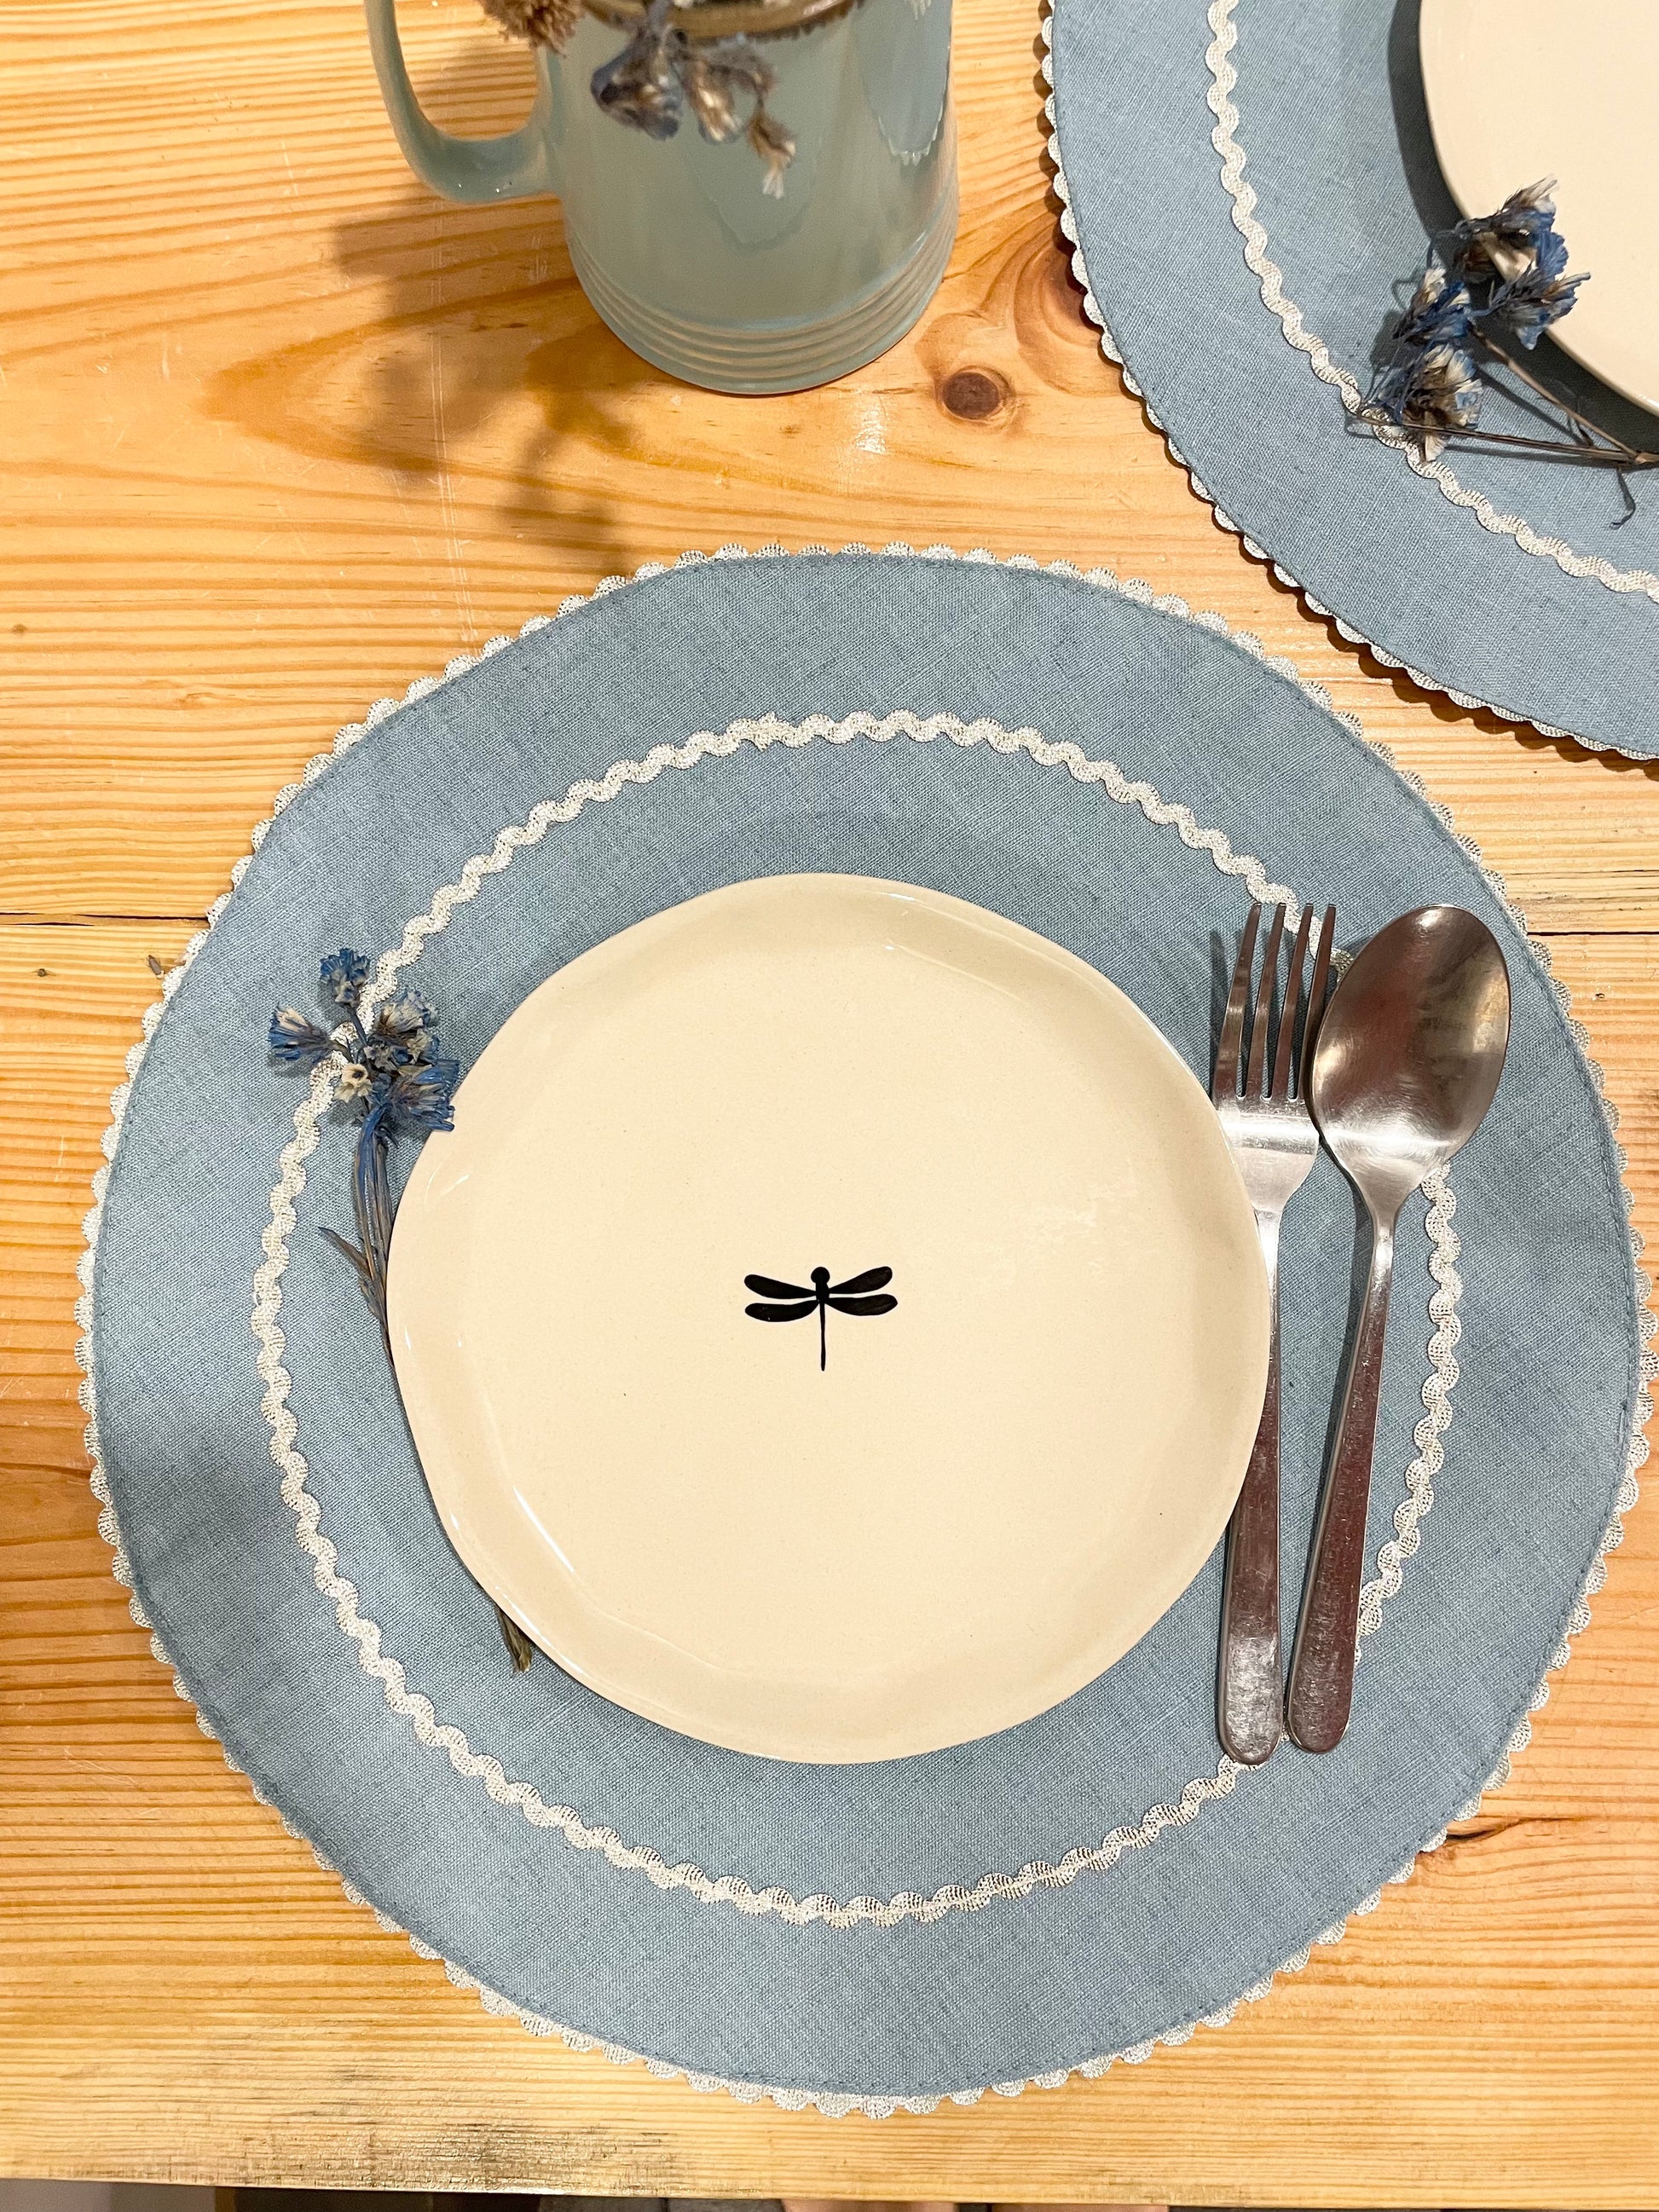 Light blue cotton table mats with zari scallop border, round ceramic plate, dried flowers, and cutlery. Buy home decor gifts India.